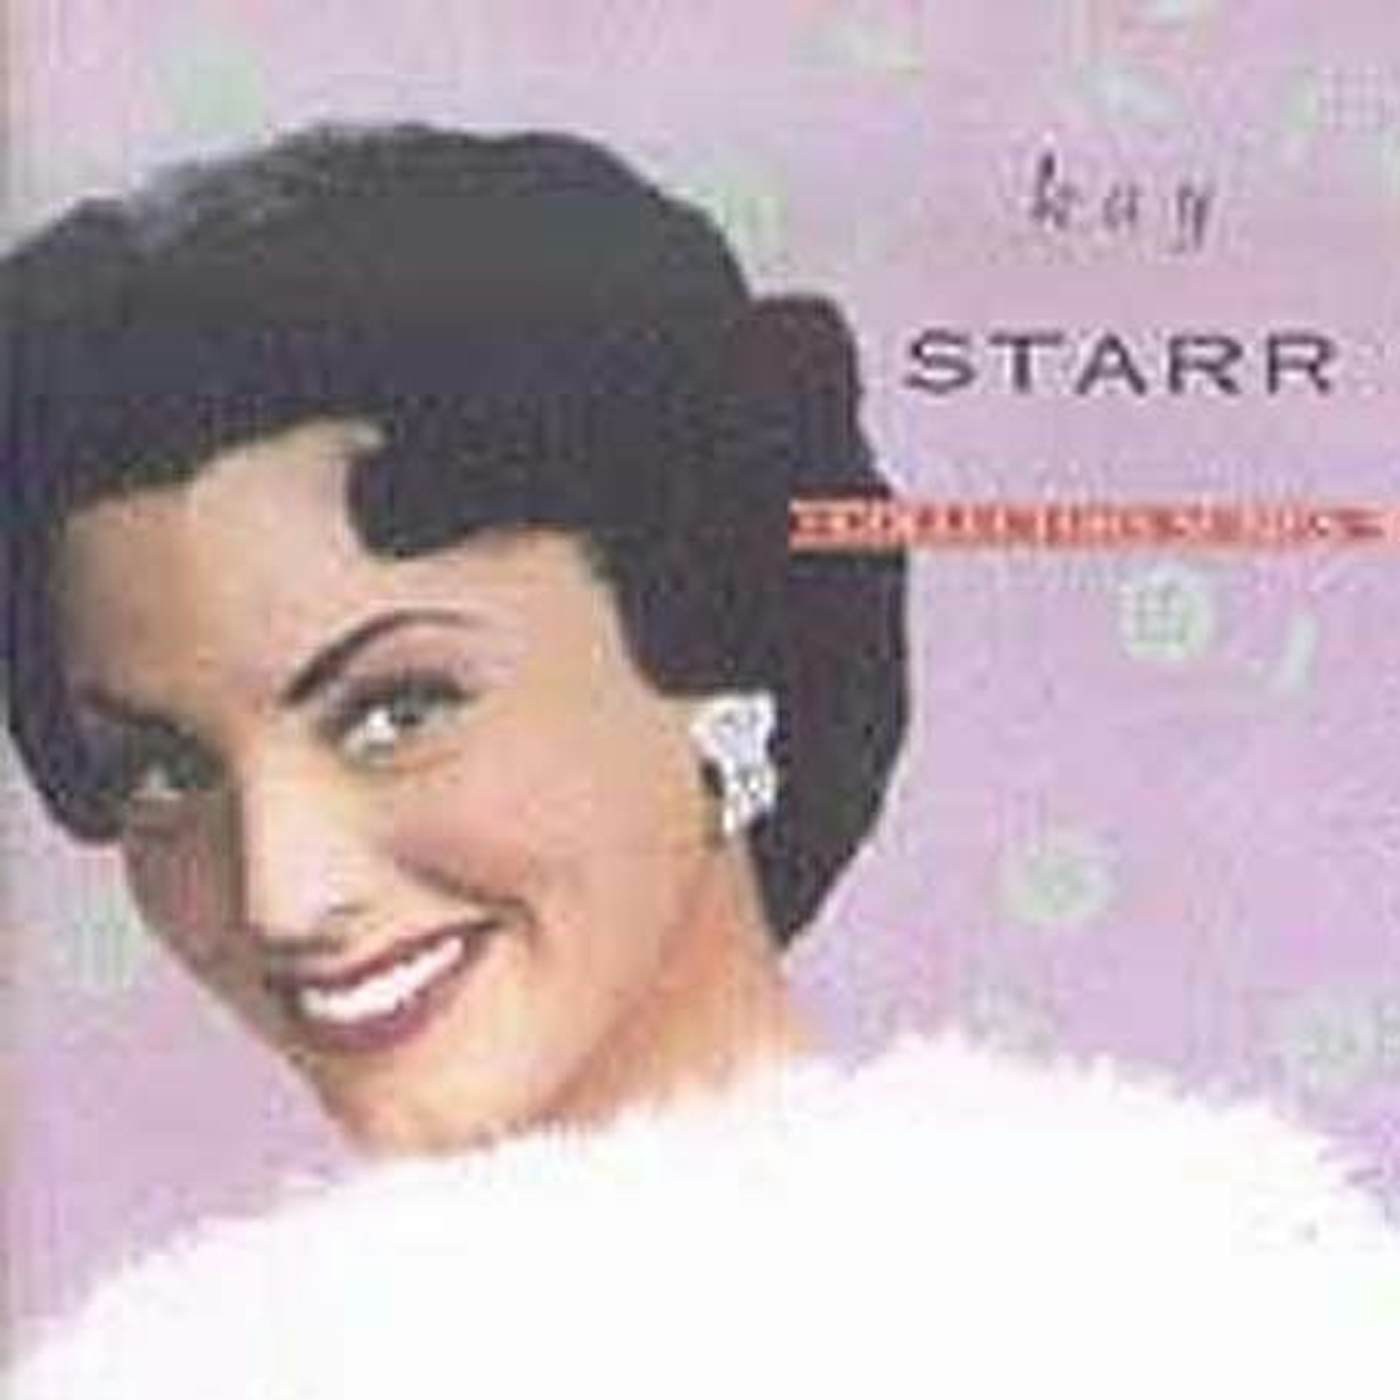 Kay Starr CAPITOL COLLECTOR'S SERIES CD